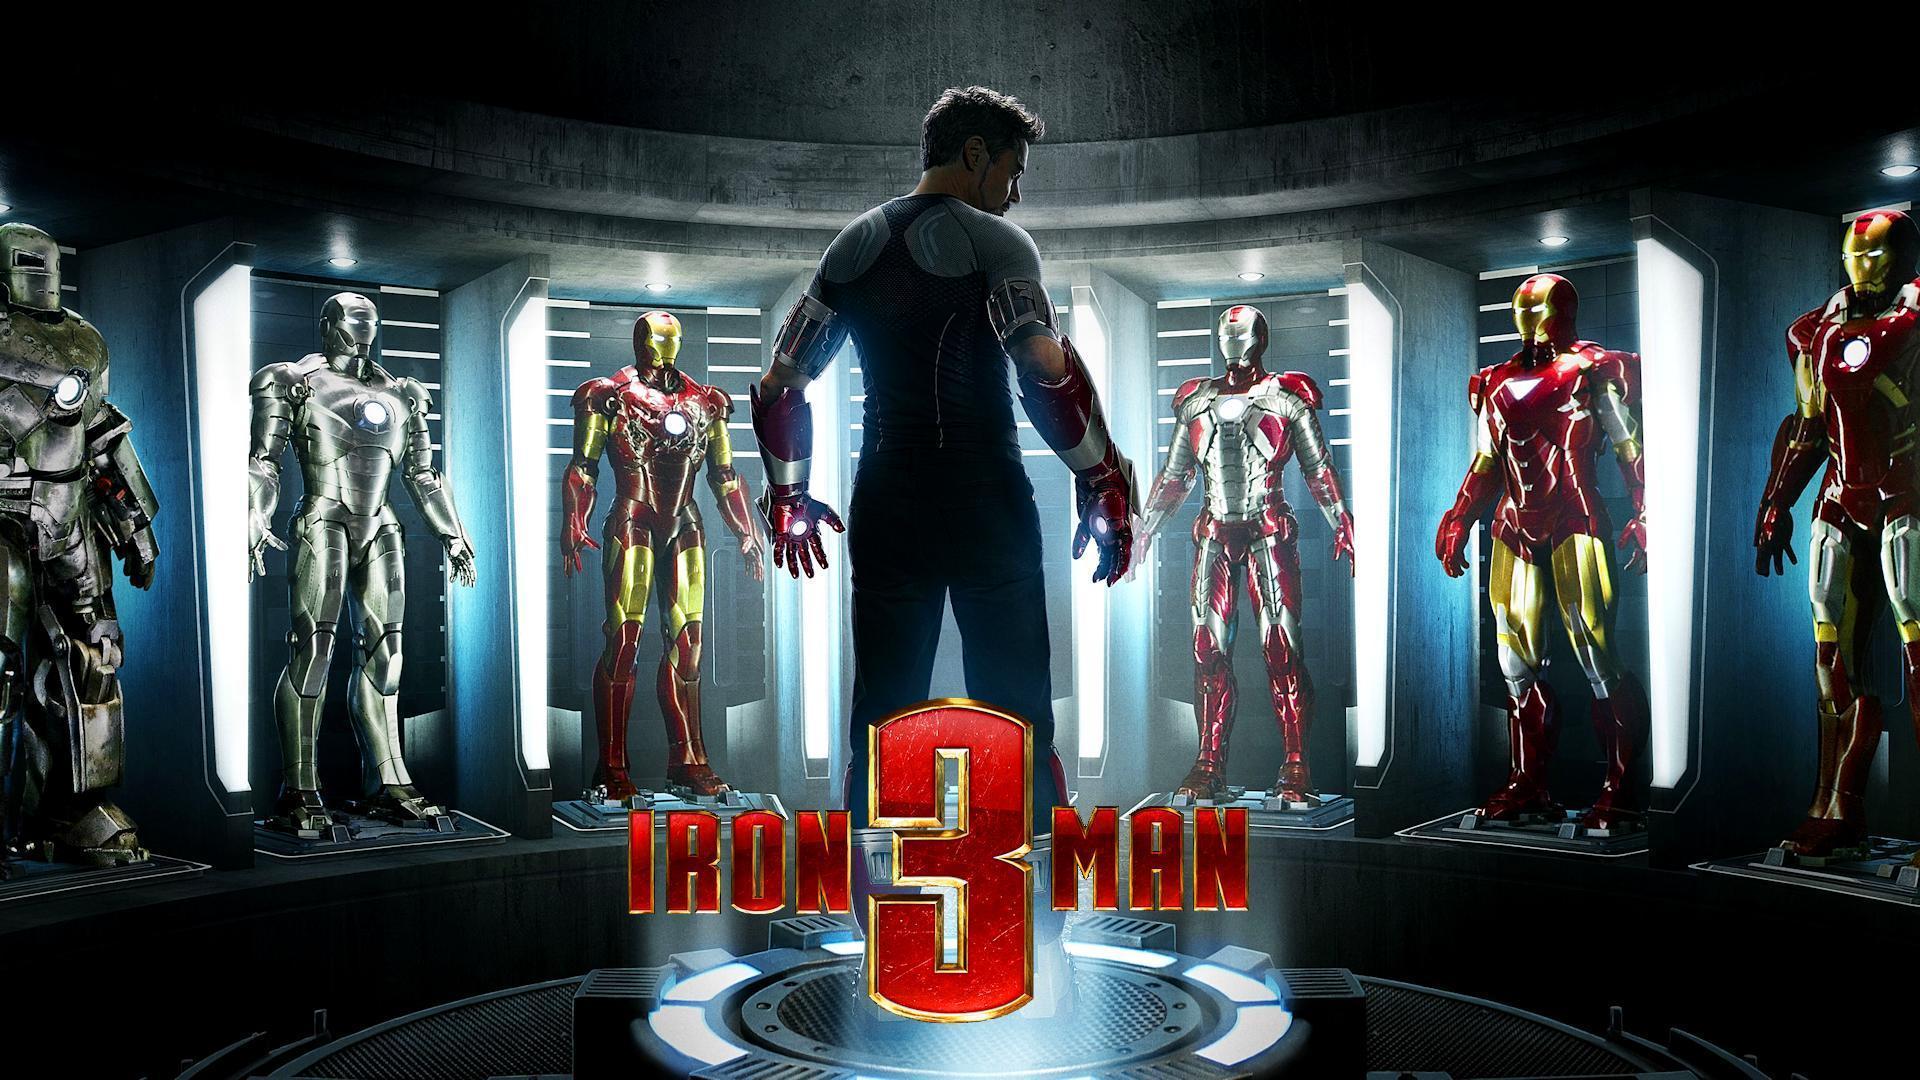 Iron Man 3 Suits of Armor Exclusive HD Wallpaper